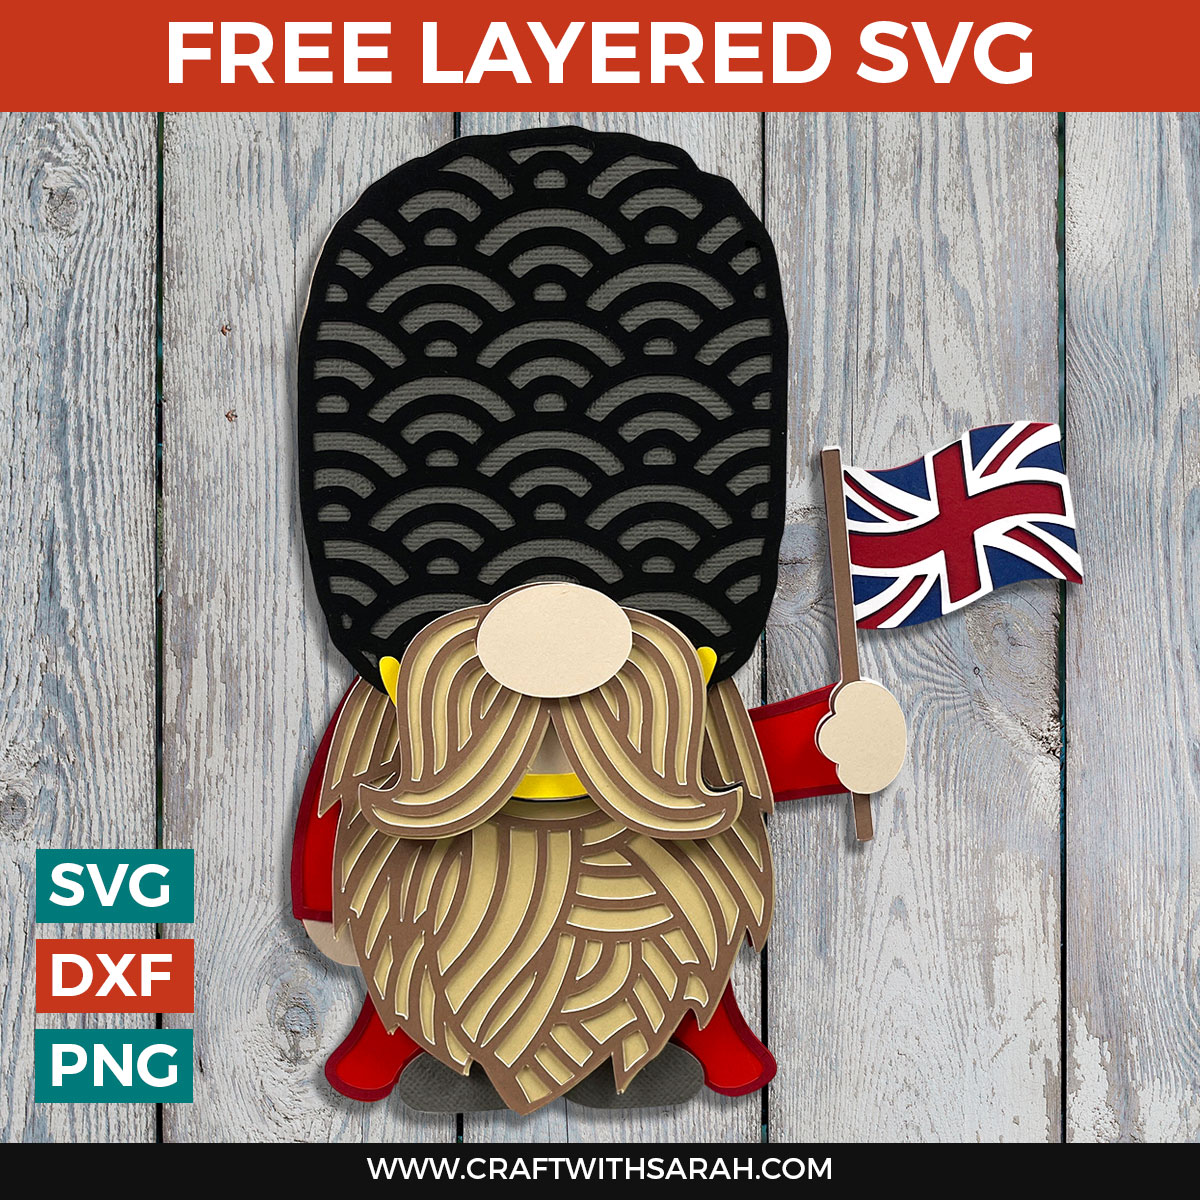 Free Beefeater Guard Gnome SVG for the Queen’s Platinum Jubilee